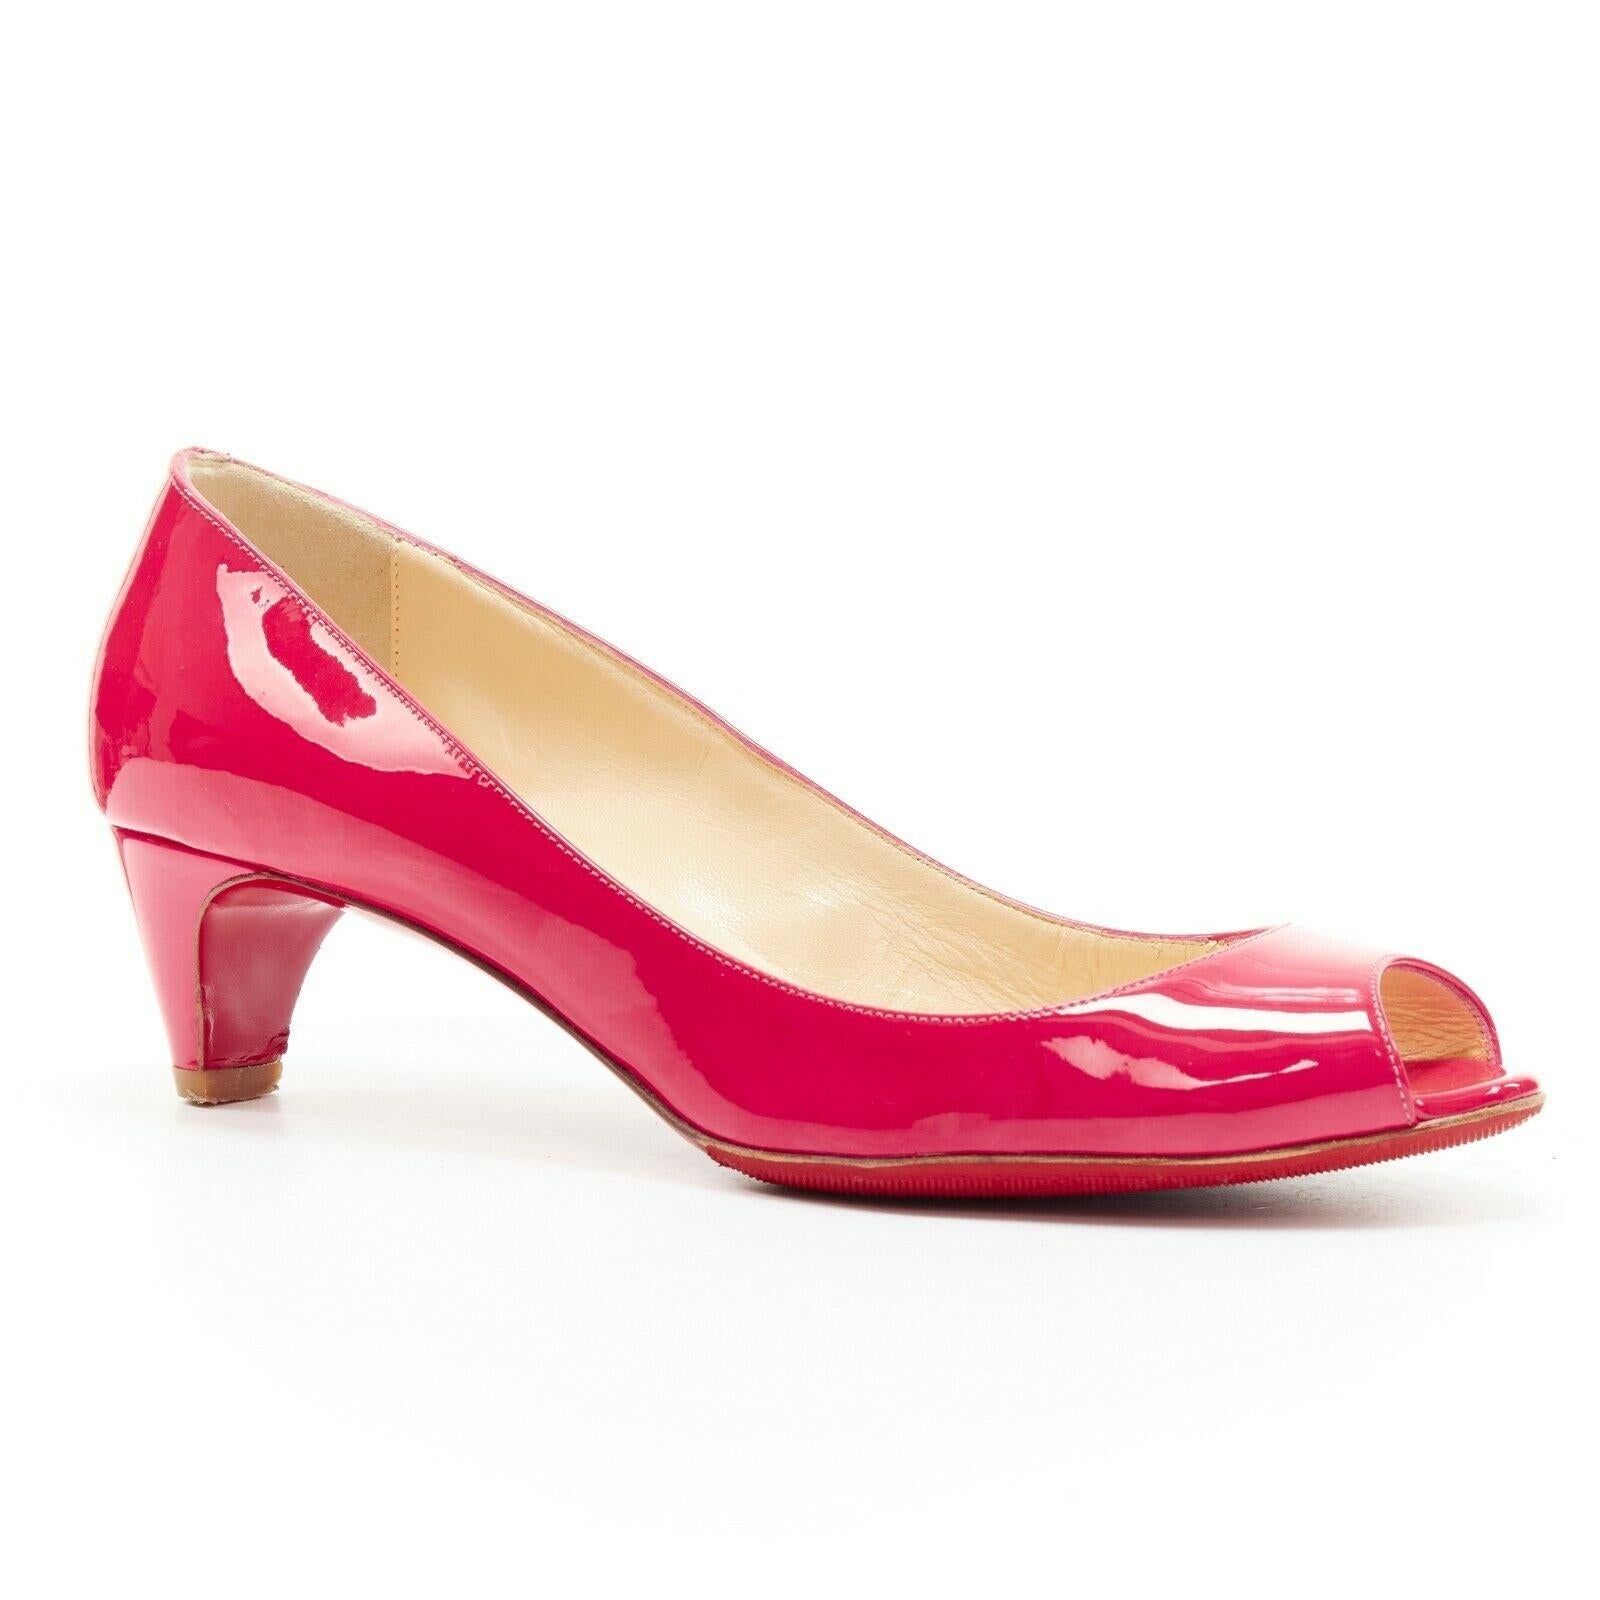 CHRISTIAN LOUBOUTIN pink patent peep toe chunky comma kitten heel EU36 
Reference: TGAS/A03156 
Brand: Christian Louboutin 
Designer: Christian Louboutin 
Material: Patent Leather 
Color: Pink 
Pattern: Solid 
Extra Detail: Pink patent leather